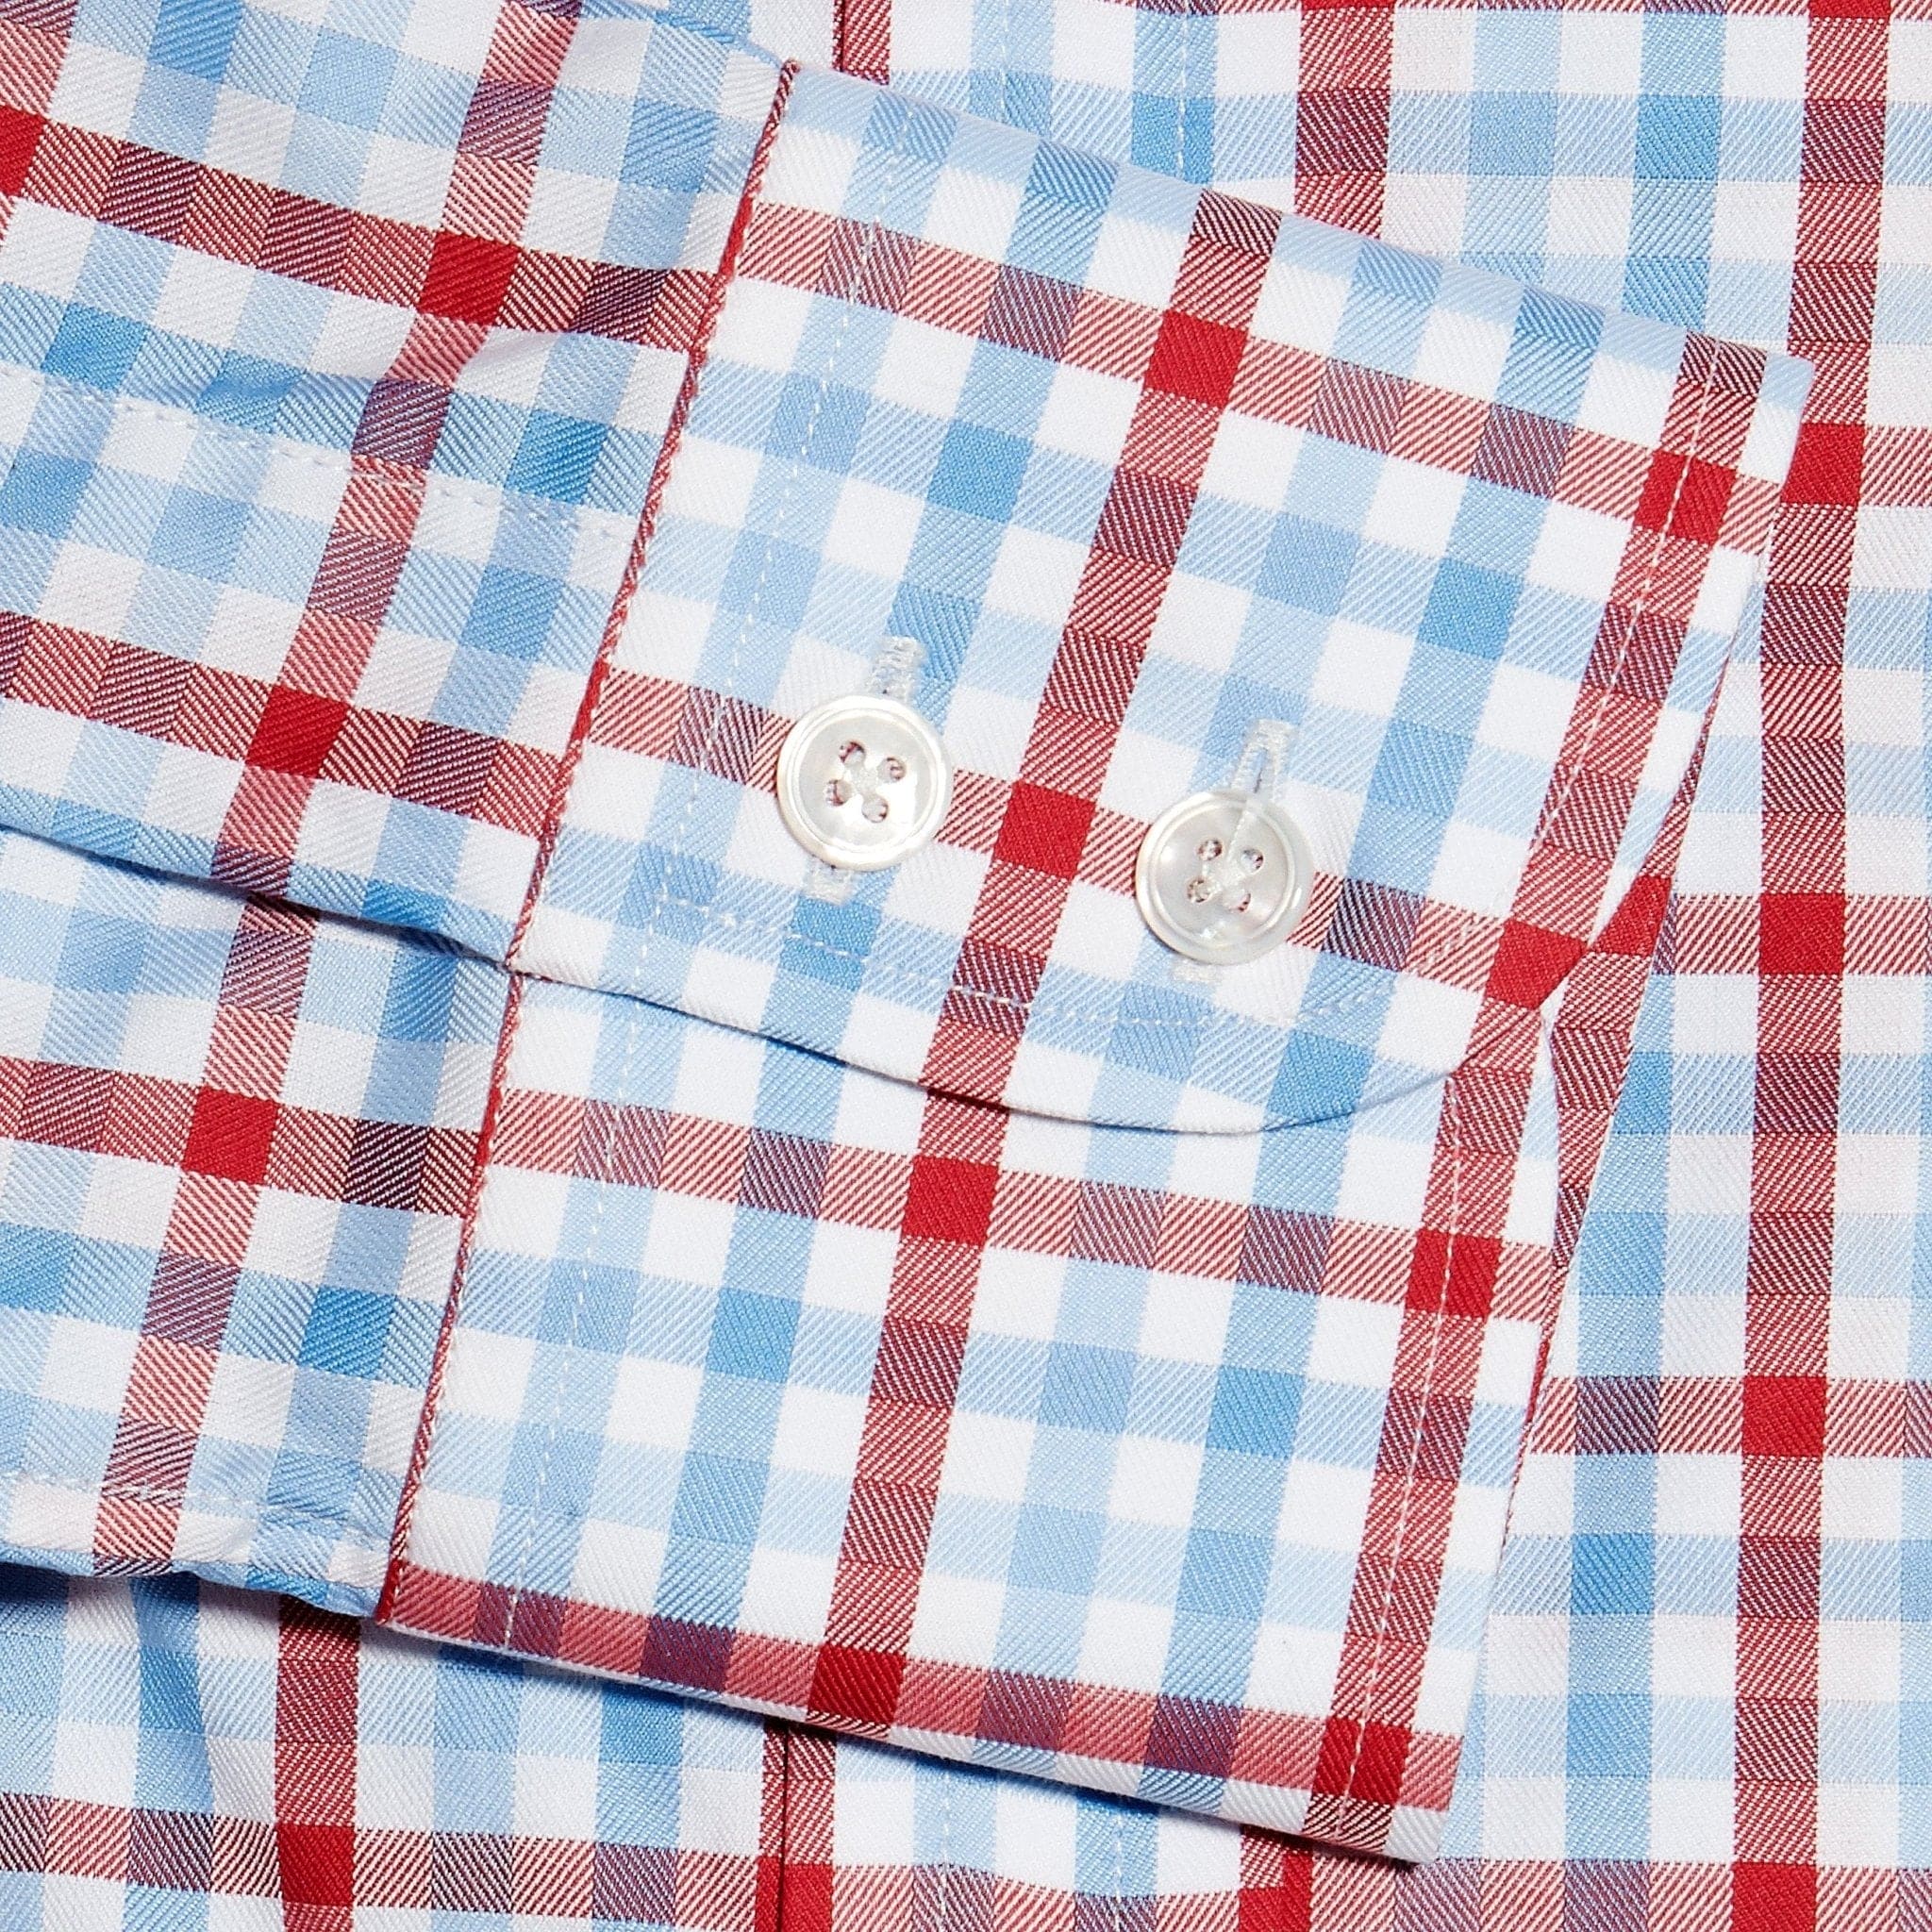 Contemporary Fit, Cut-away Collar, 2 Button Cuff Shirt In Red, Blue & White Large Check Twill Cotton